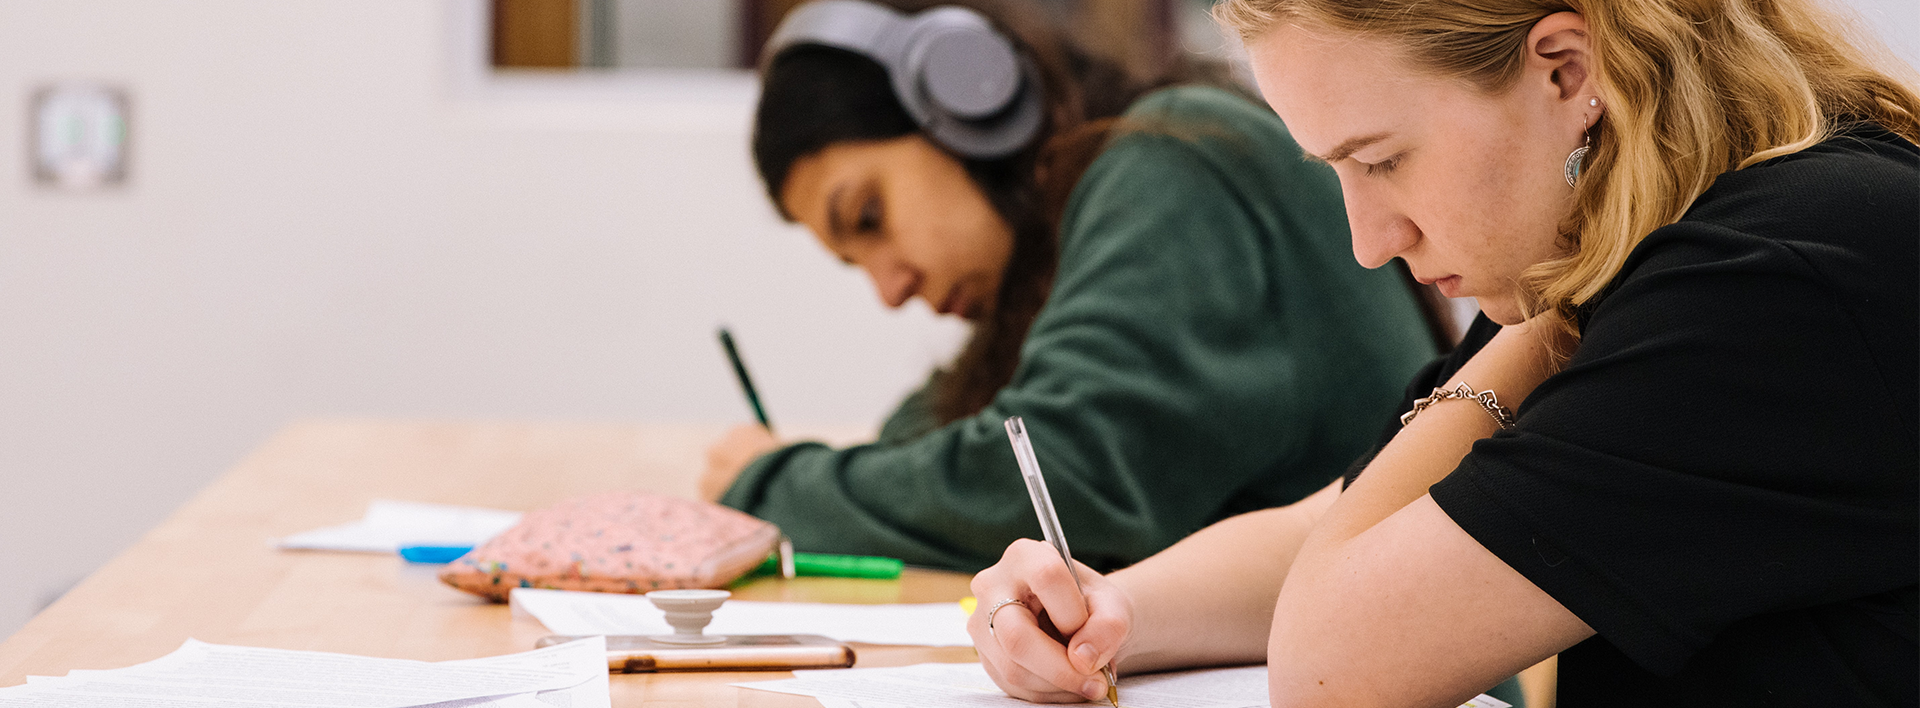 Two females students writing, one is wearing headphones.